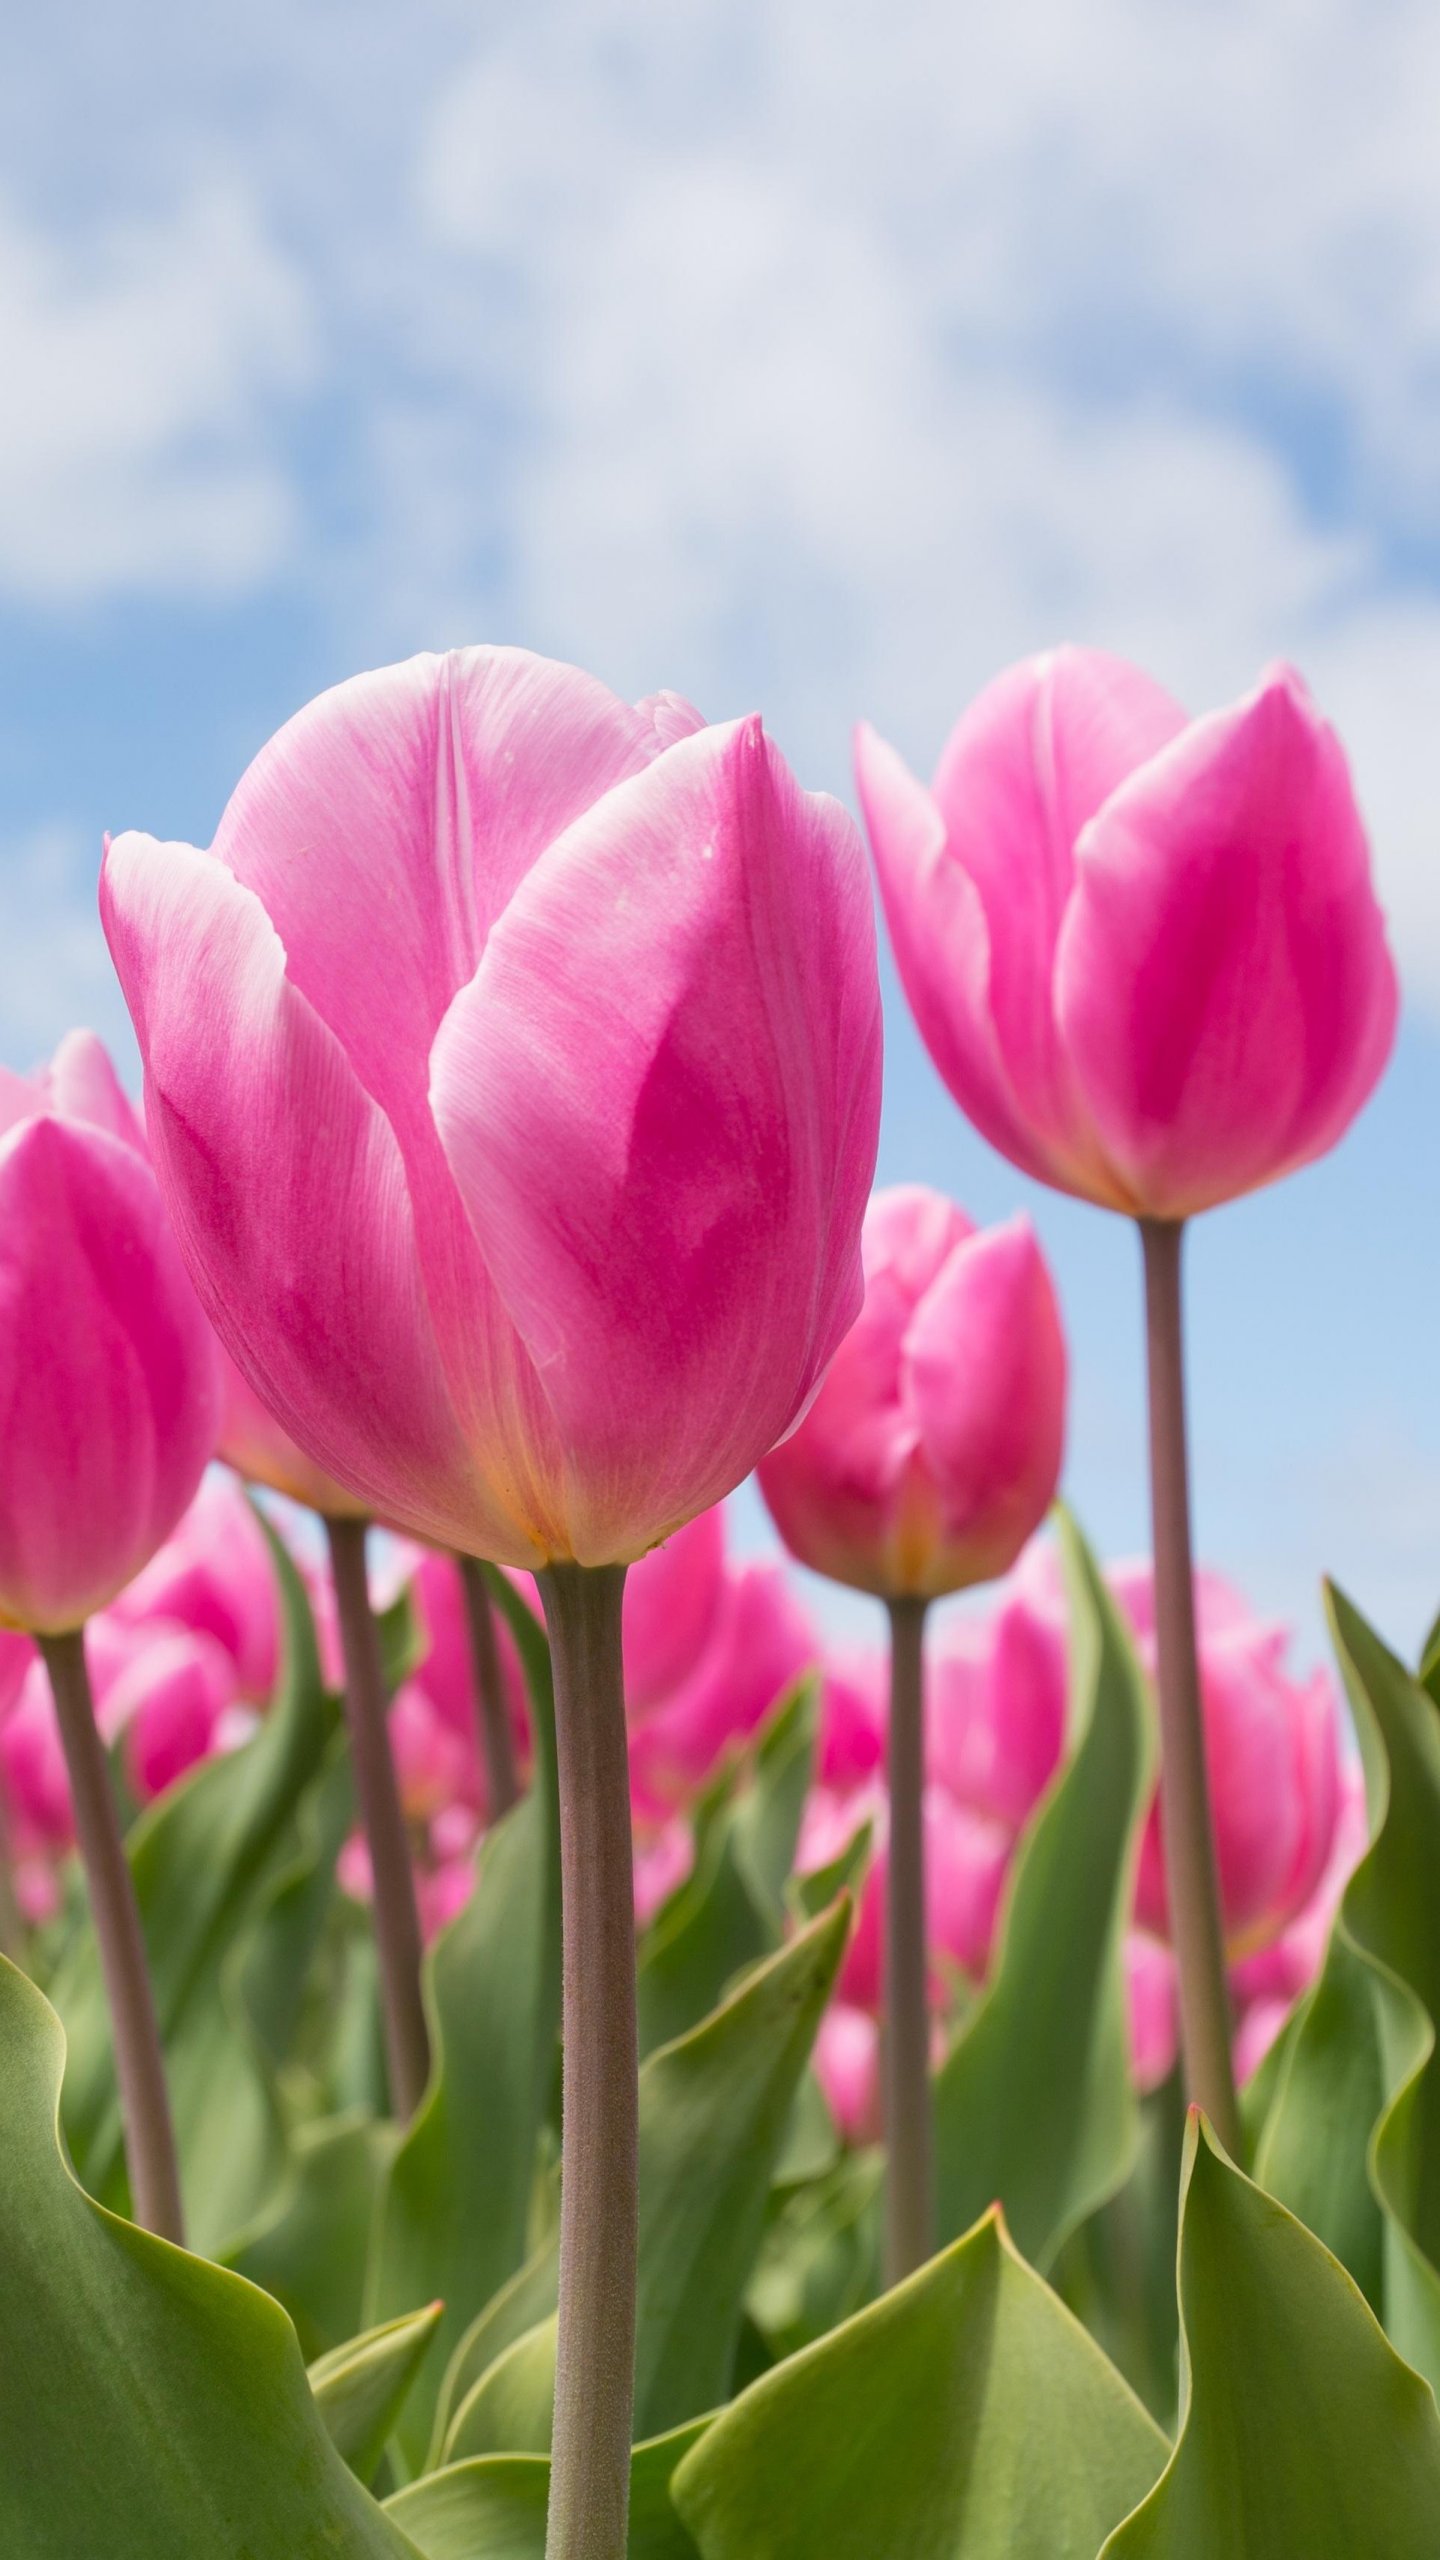 Spring Tulips Wallpaper - iPhone, Android & Desktop Backgrounds